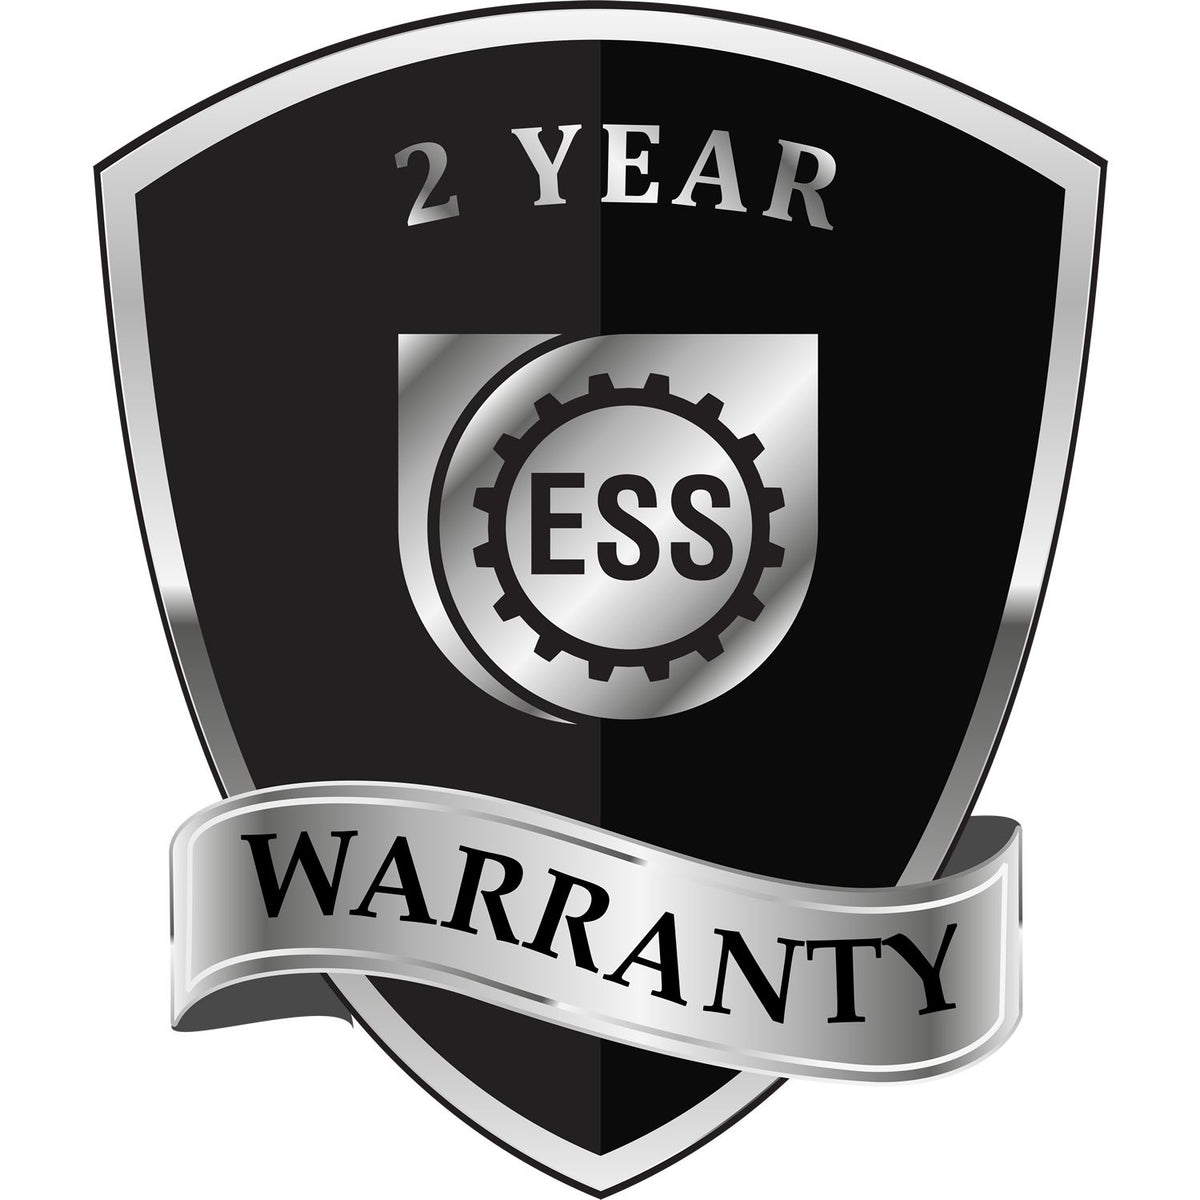 A badge or emblem showing a warranty icon for the Soft Michigan Professional Engineer Seal